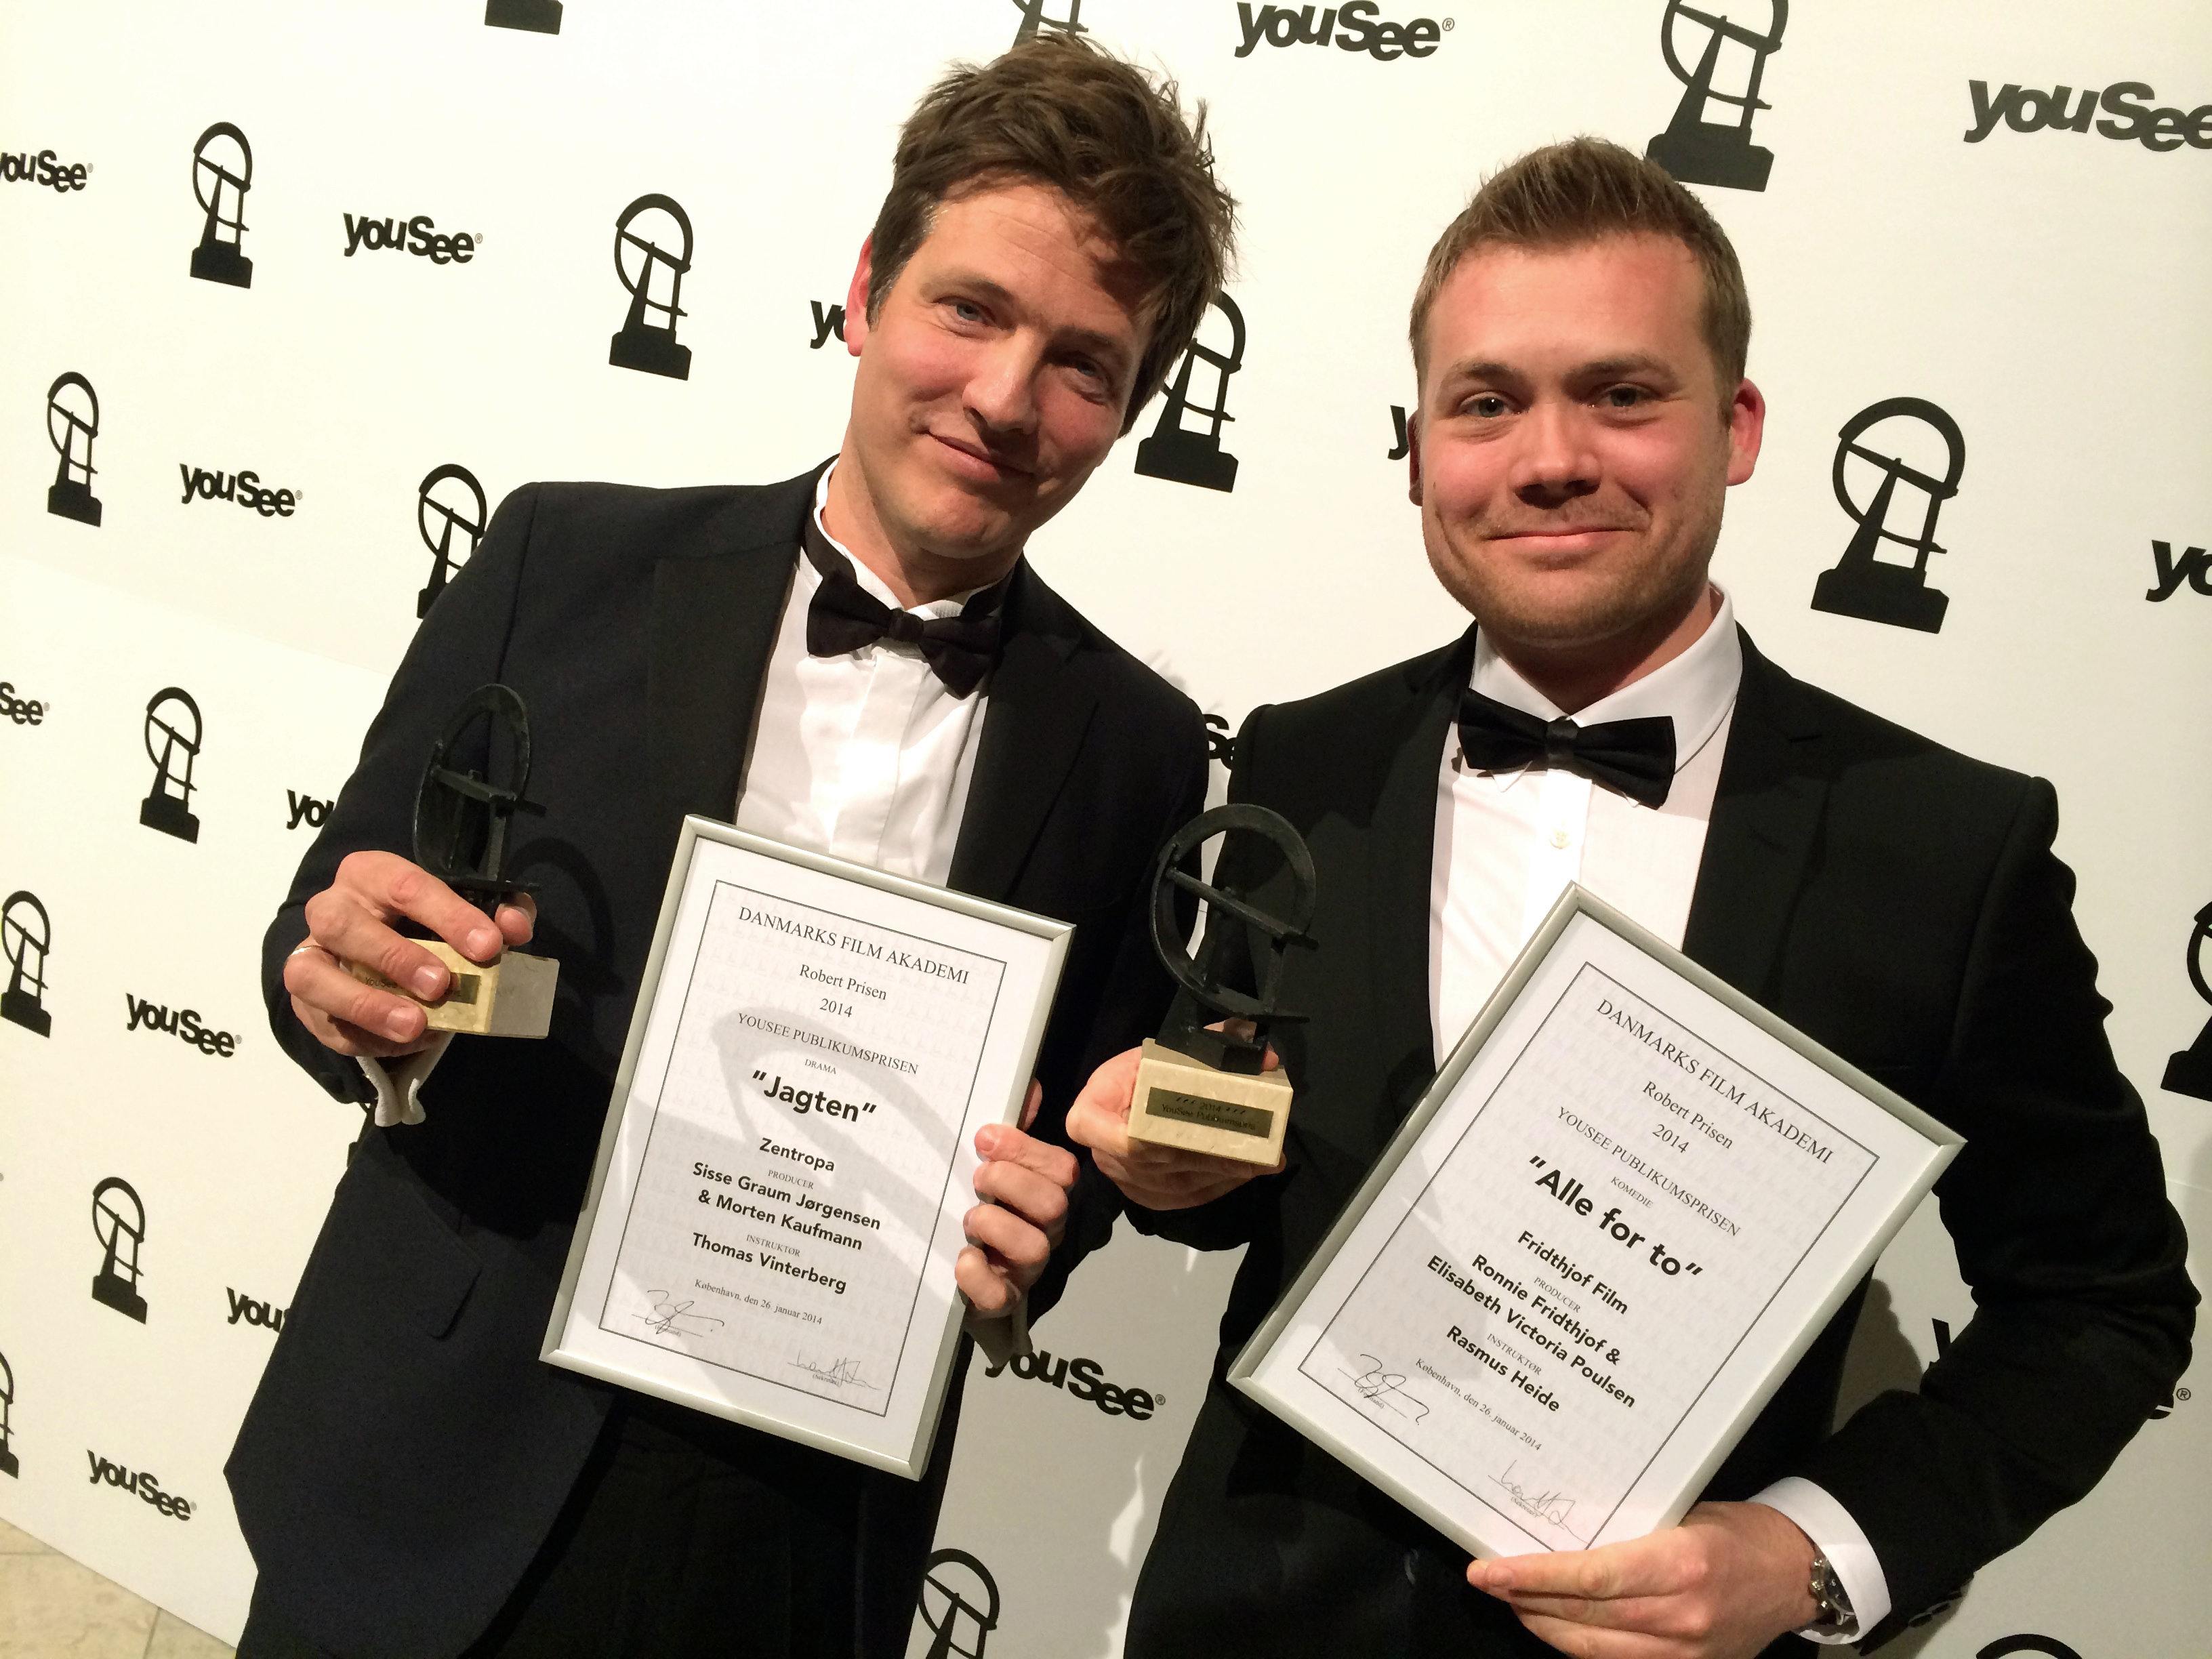 The Hunt (2012) winning Best Drama and All for Two (2013) winning Best Comedy at the Robert Festival (2014).